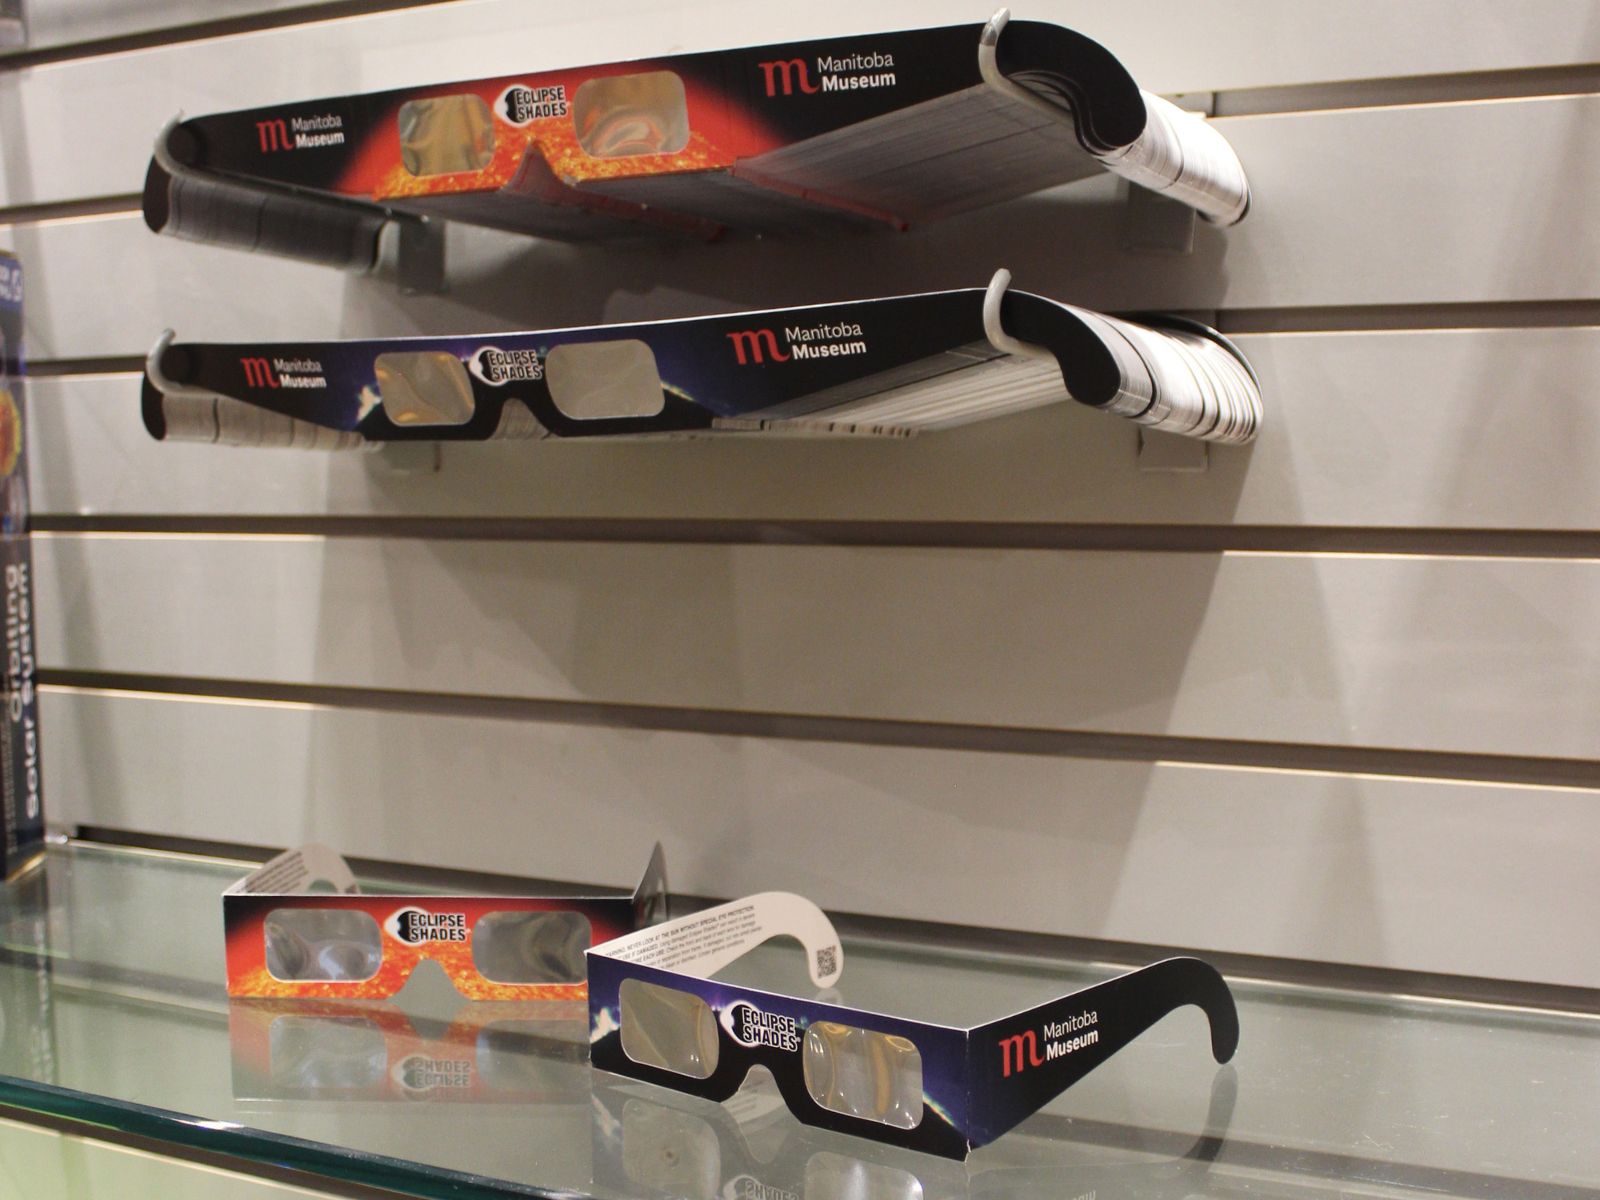 Two pairs of eclipse glasses on a glass shelf below two racks full of unfolded eclipse glasses. One pair features a design with a close-up of the sun, and the other features a solar eclipse. The Manitoba Museum logo is on the arm of the glasses.